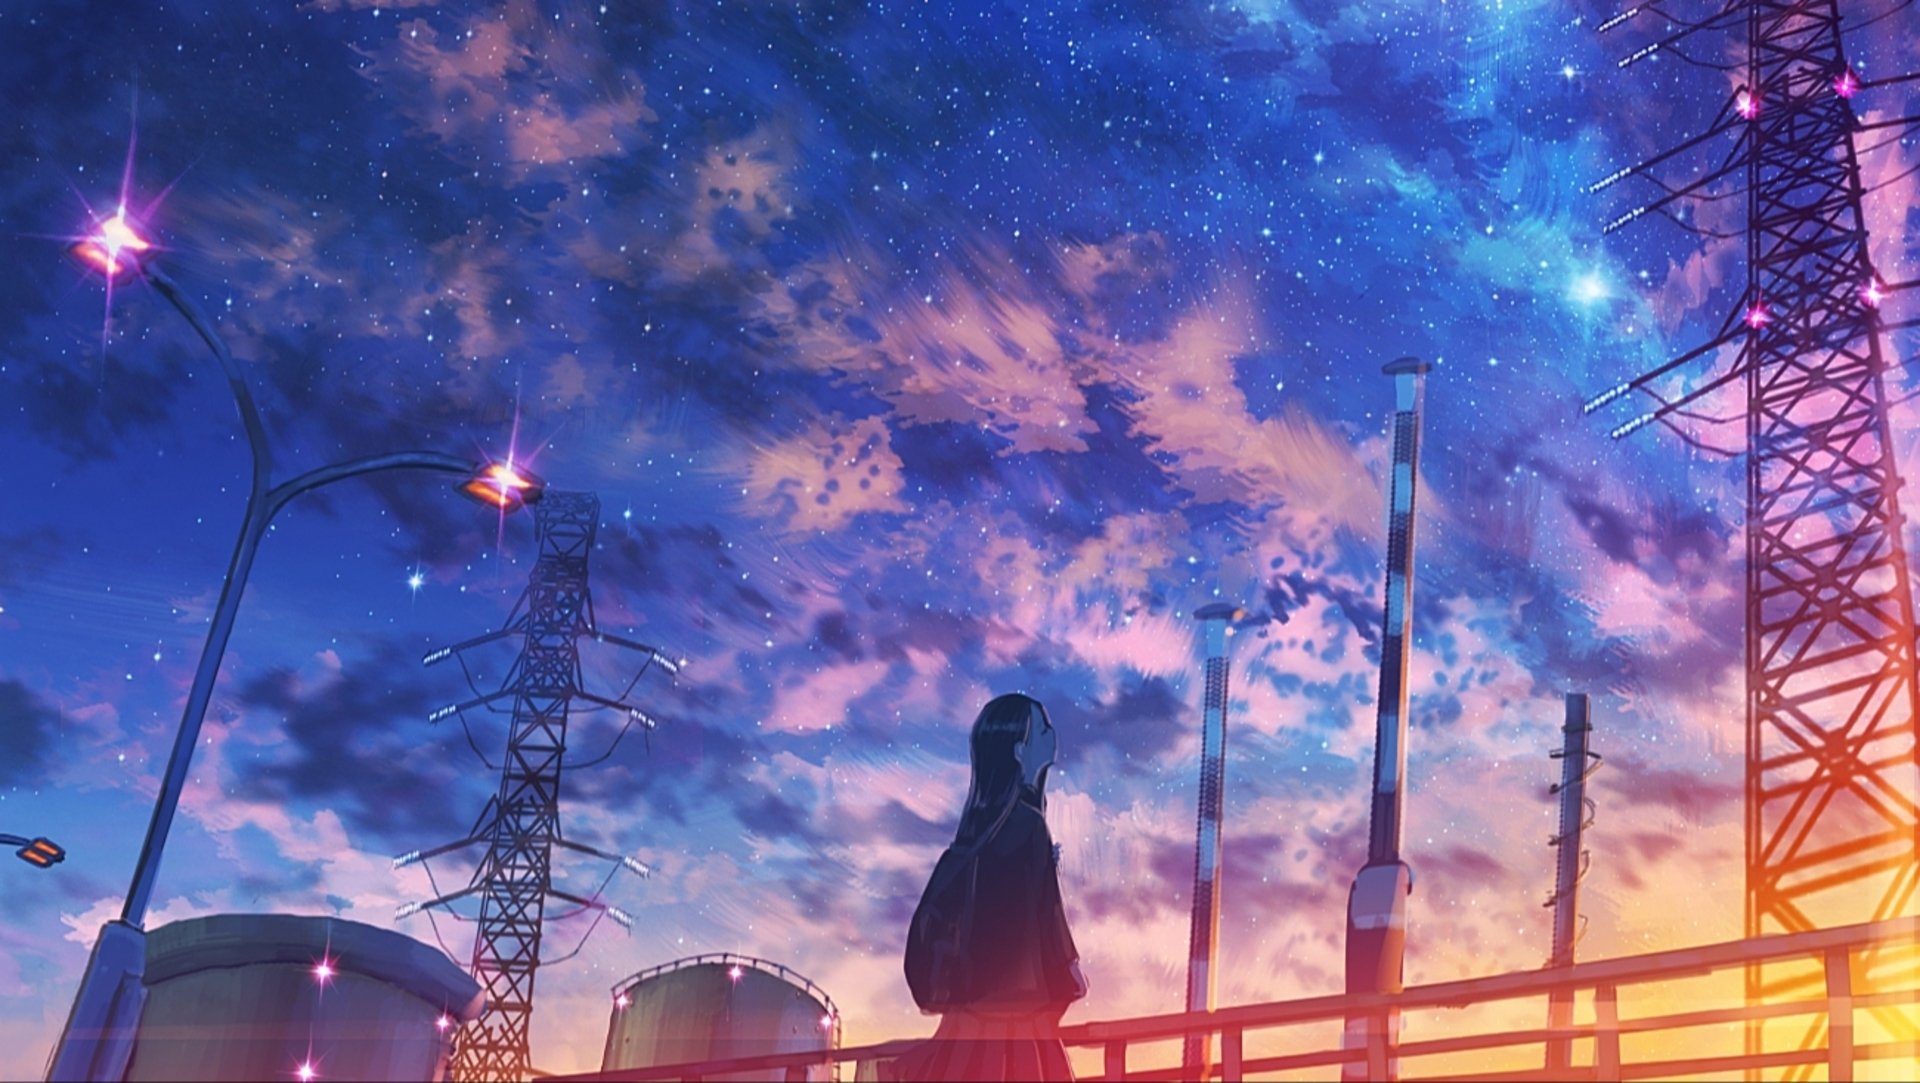 Download Starry Sky Sunset Anime Original HD Wallpaper by ナコモ